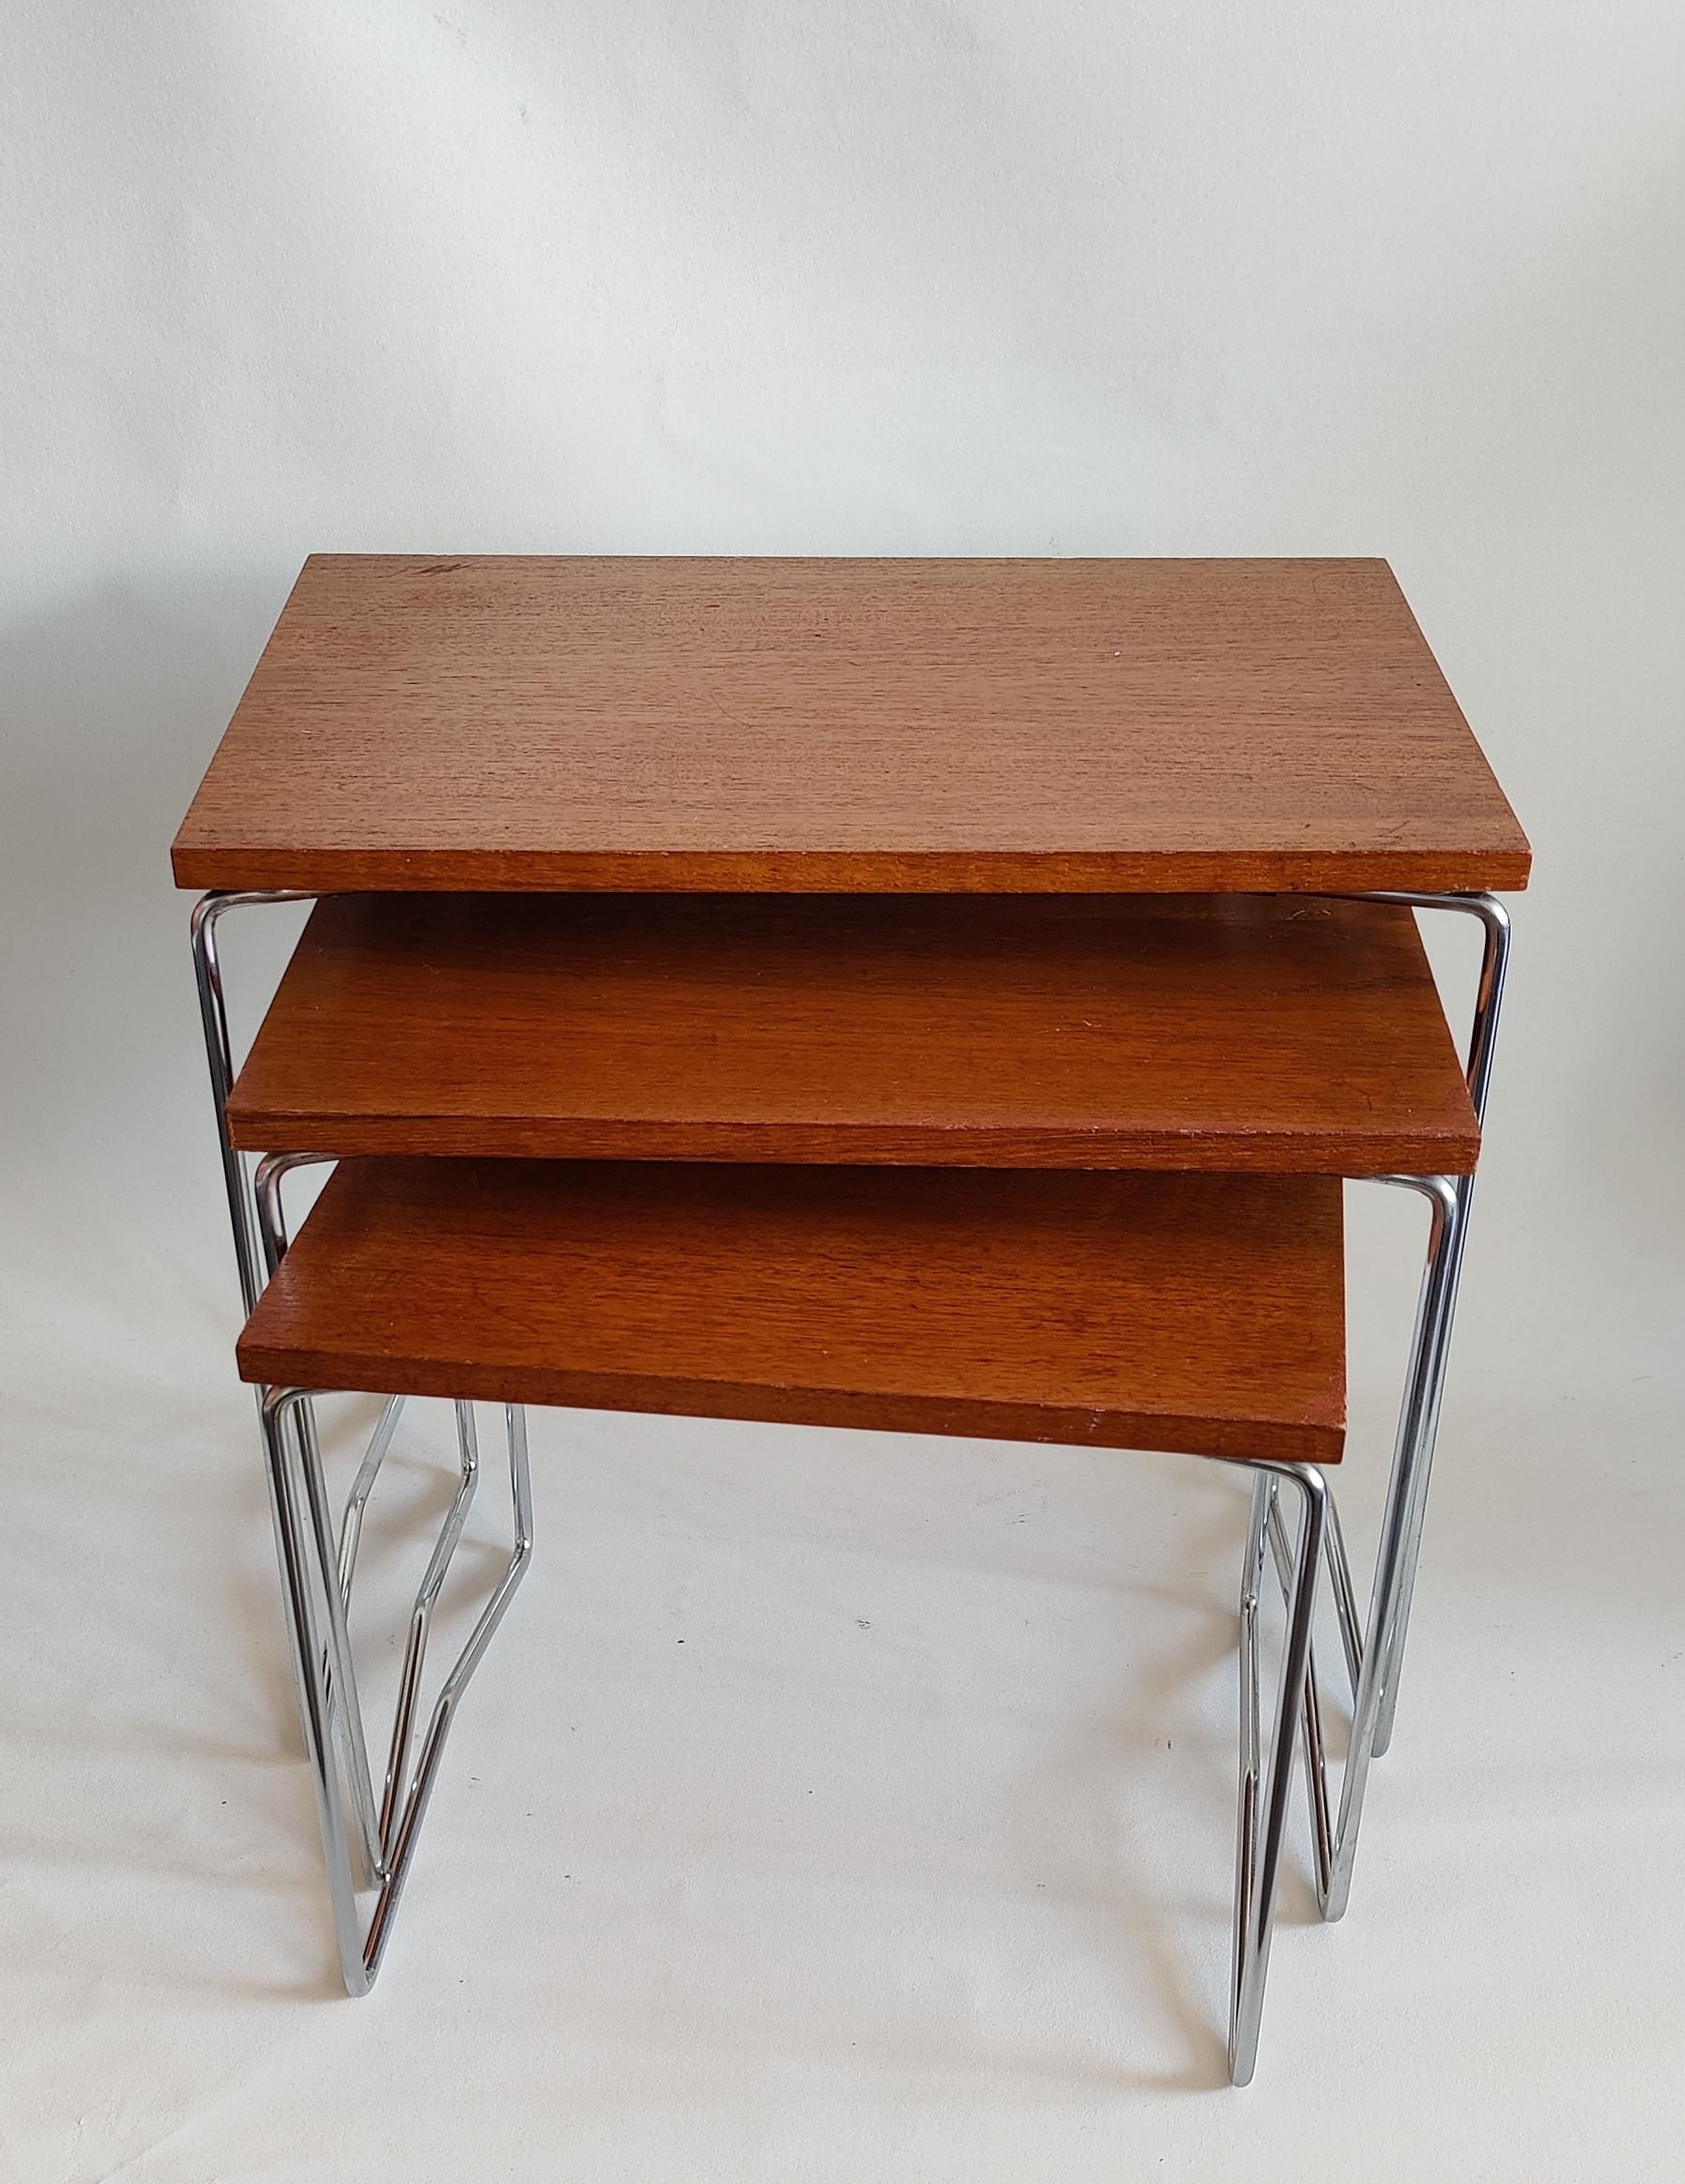 Set of three mid-century Brabantia nesting tables from the 1960’s. Top is made of teak veneer on a steel frame. 
These three nesting tables are in good sturdy condition. There are some signs of use on top of the tables, like some scratches (biggest